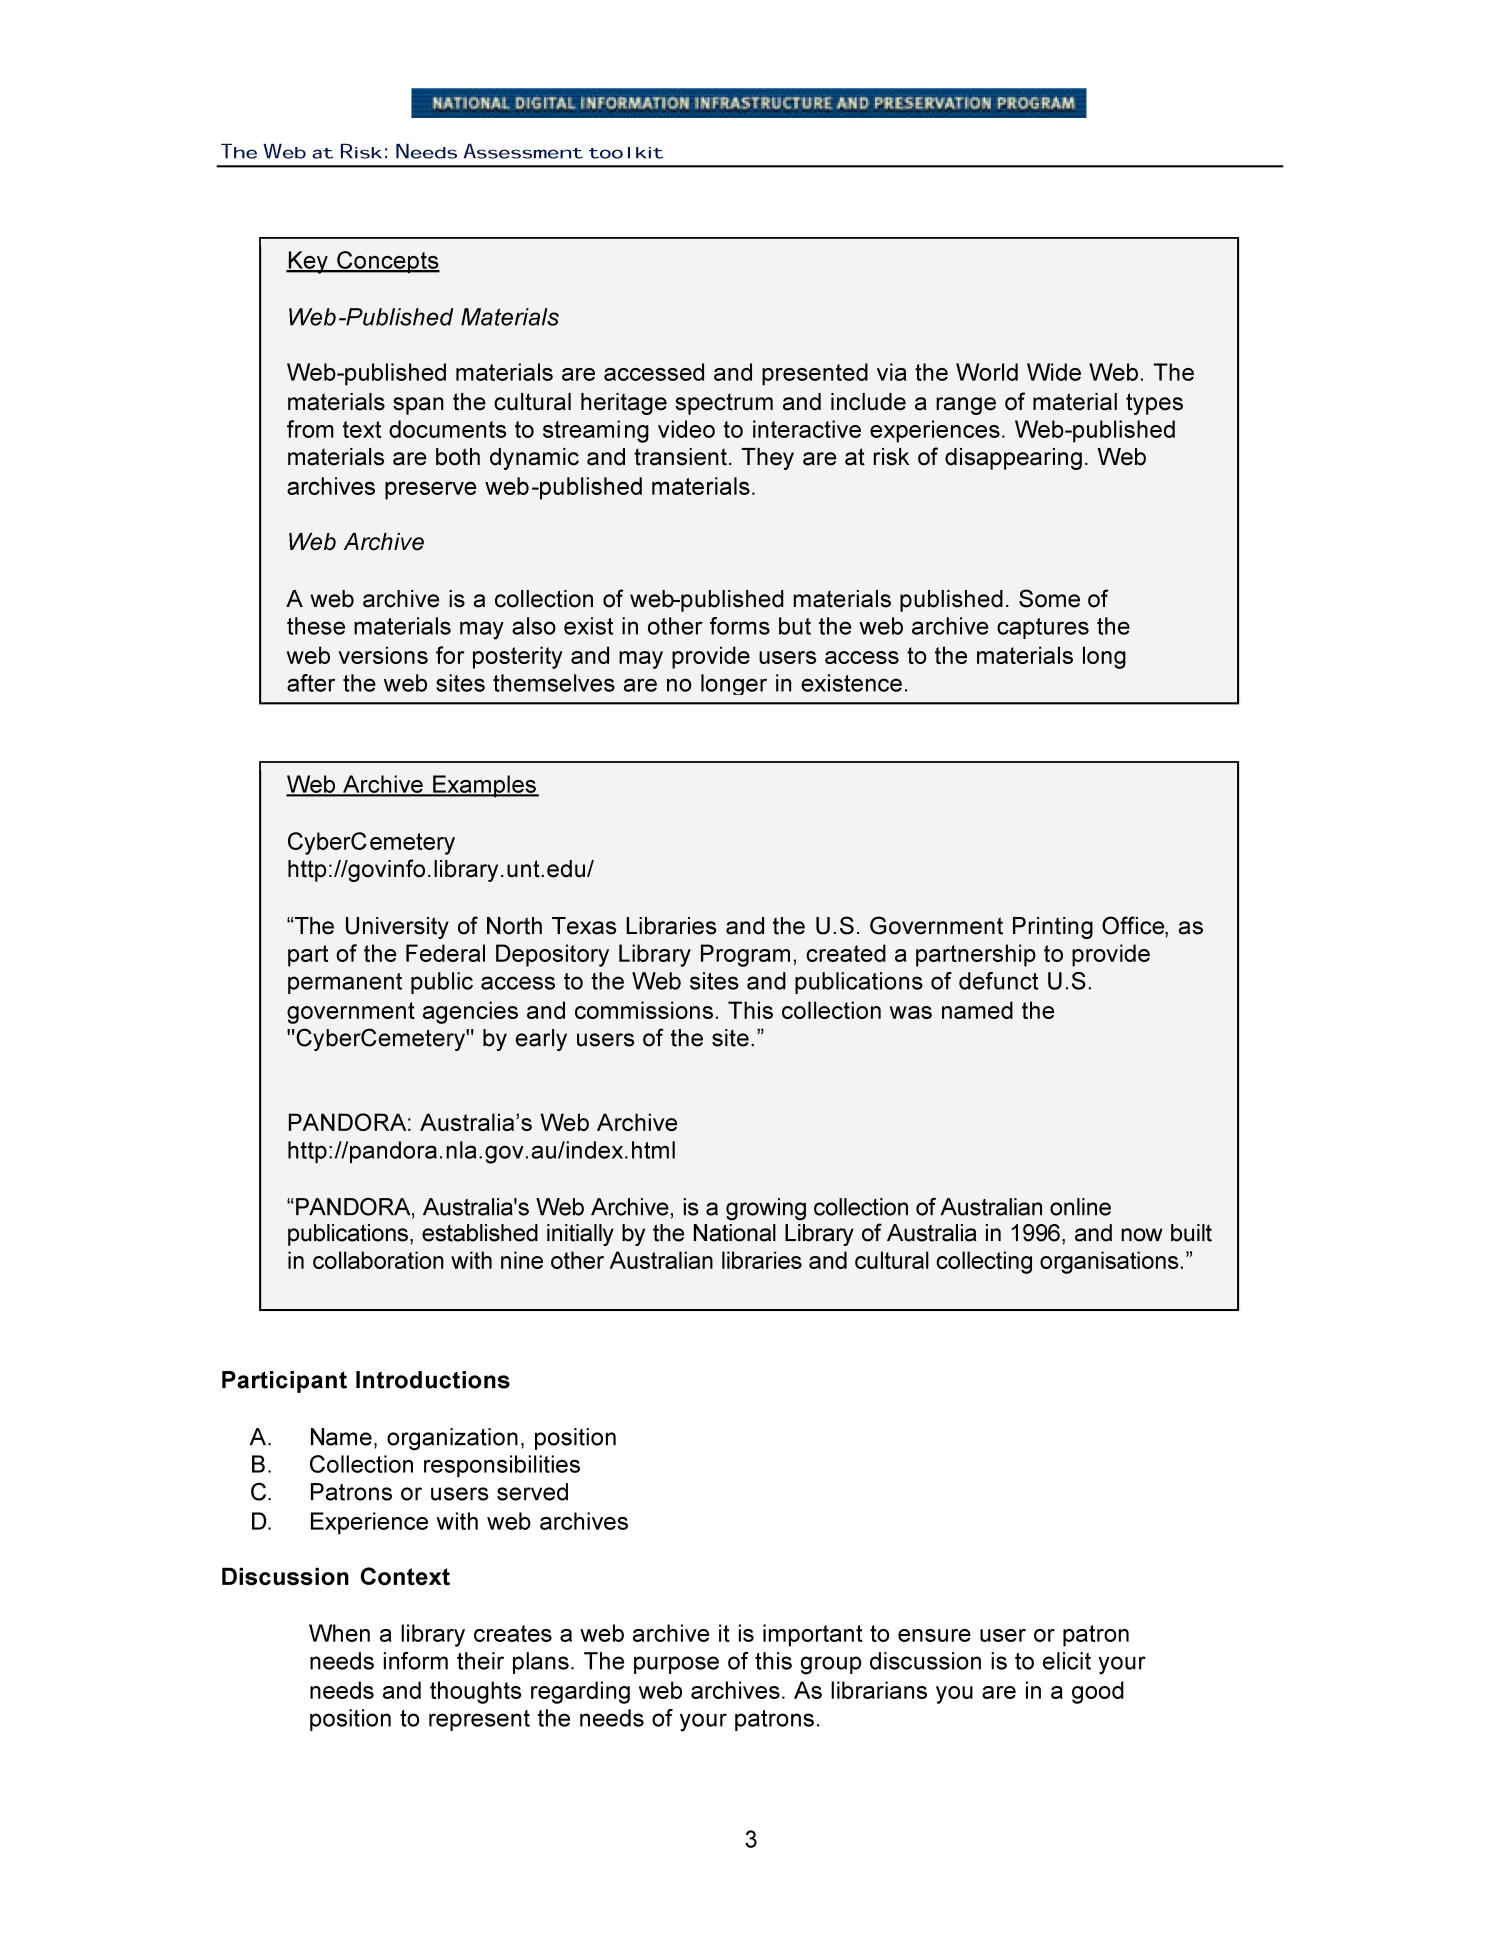 Focus Group Discussion Guide Page 3 UNT Digital Library